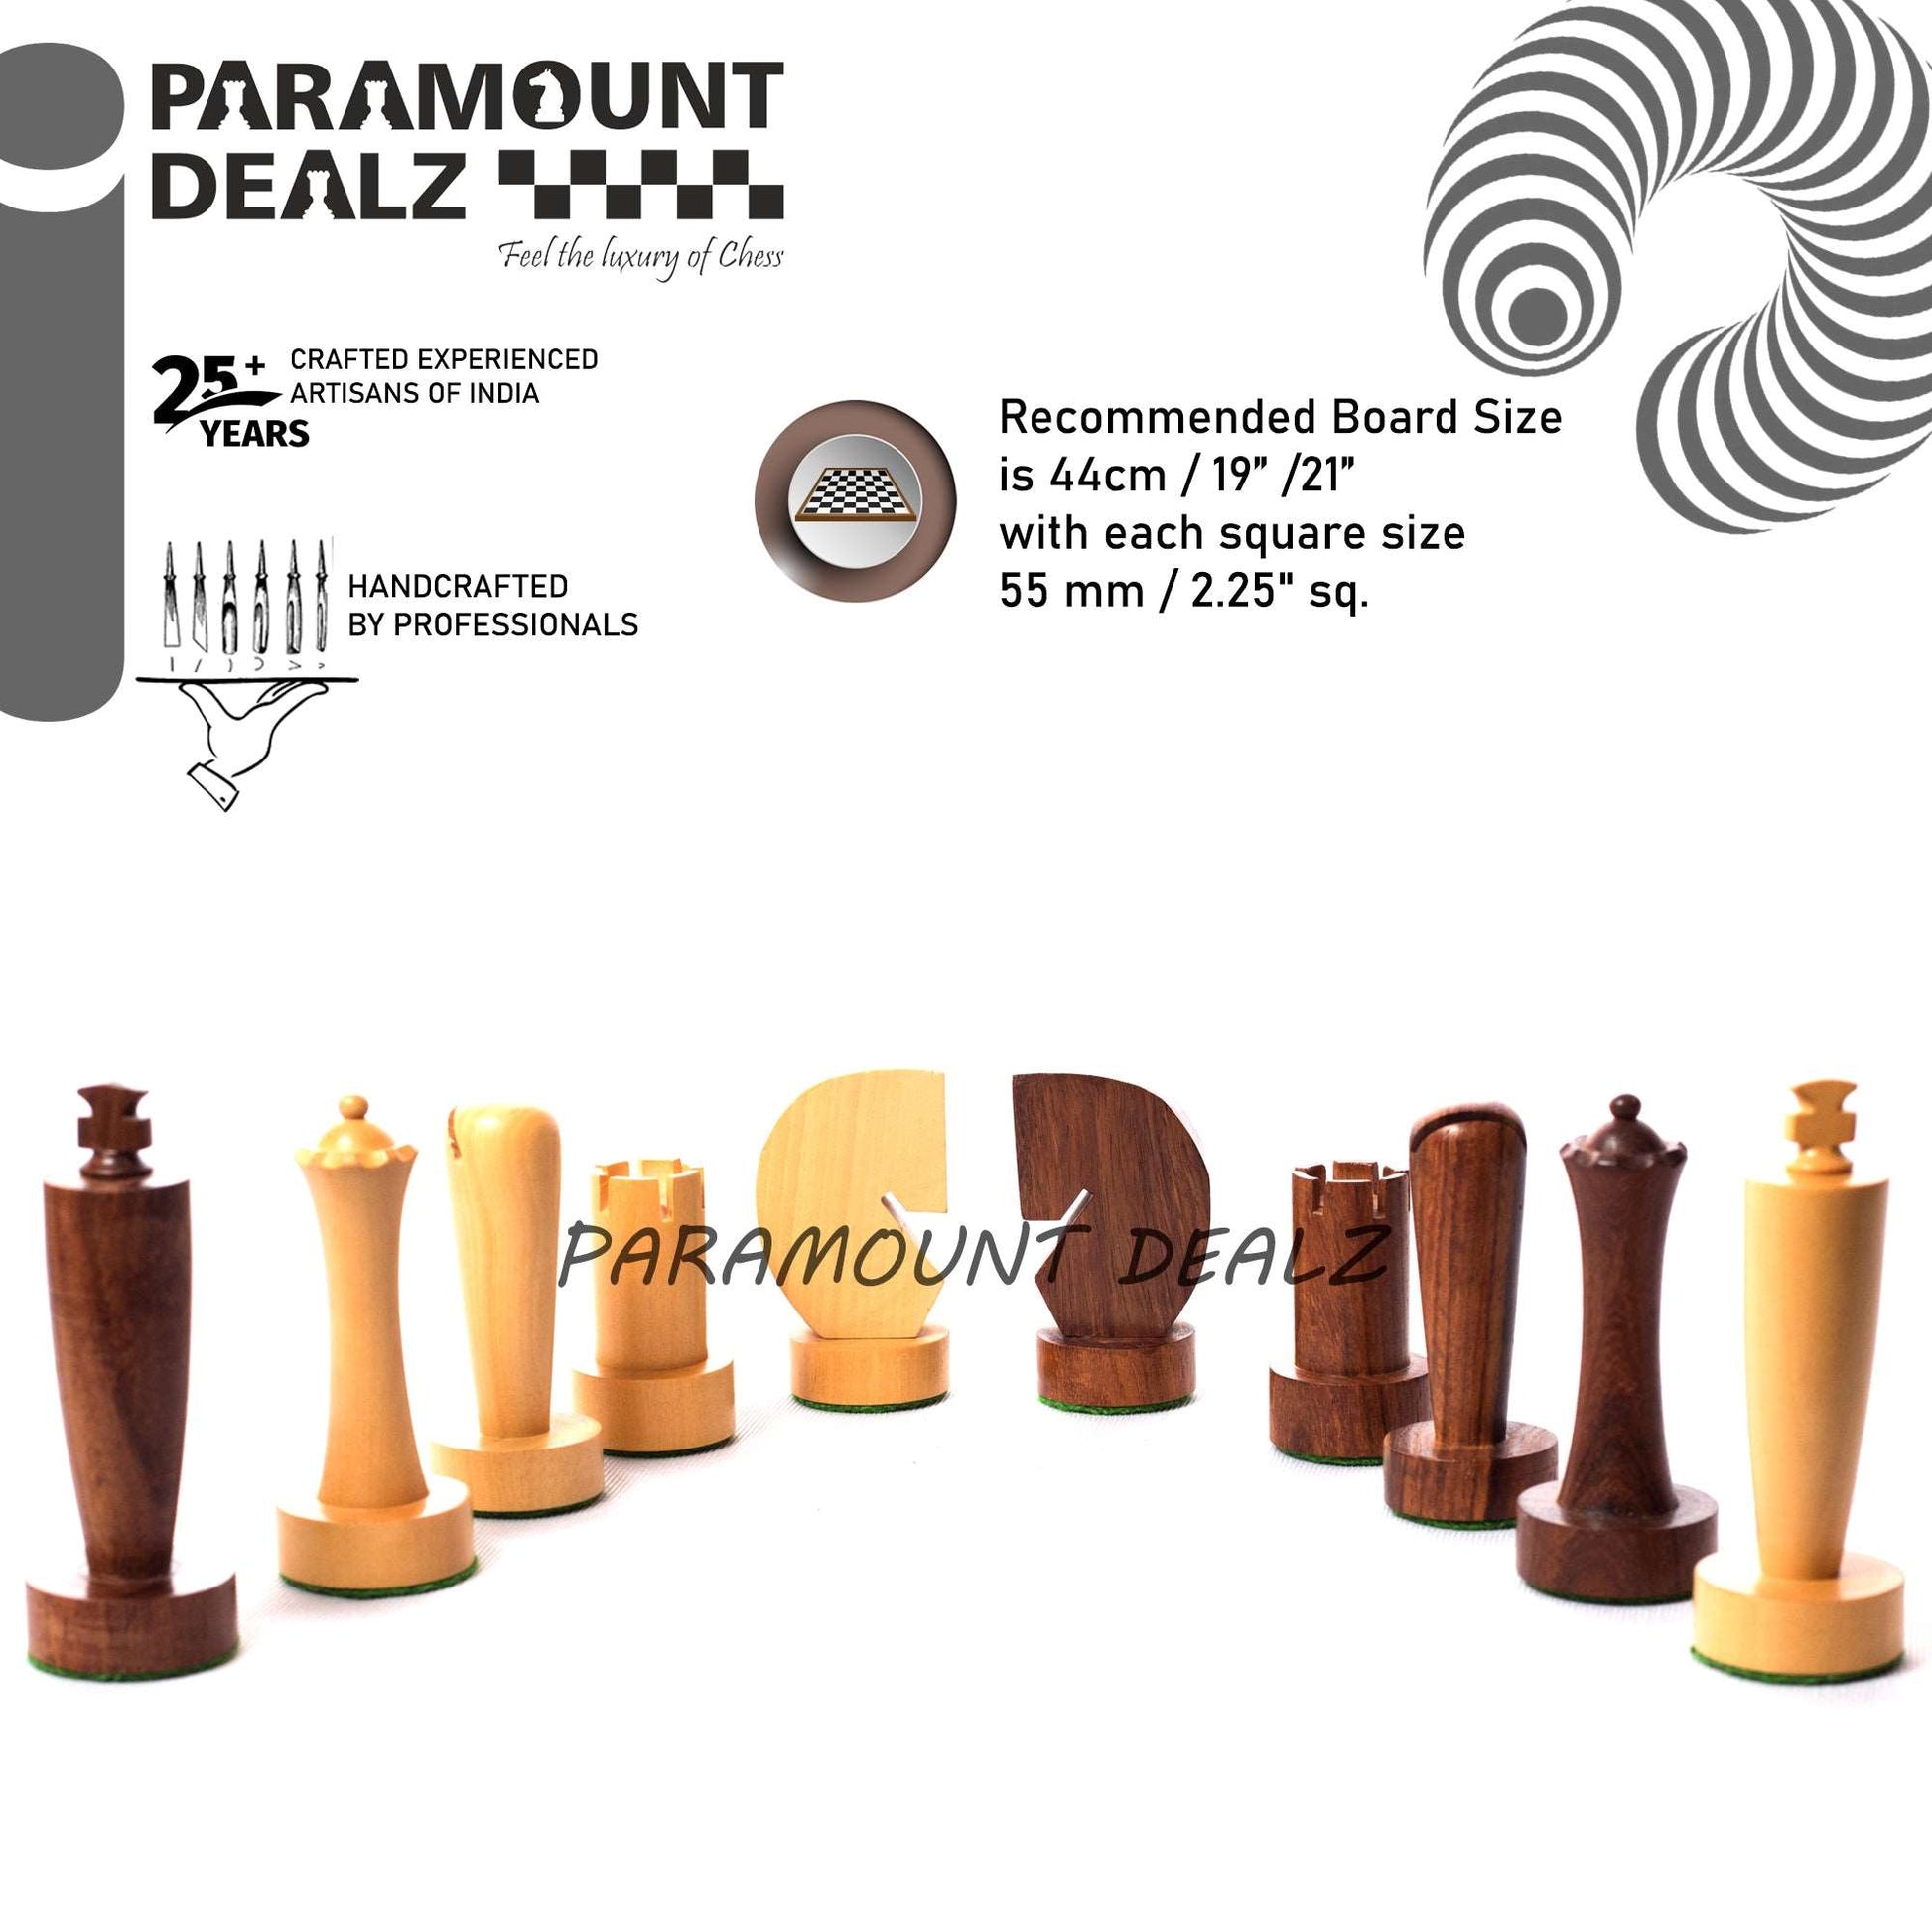 Century series Chess pieces in Indian